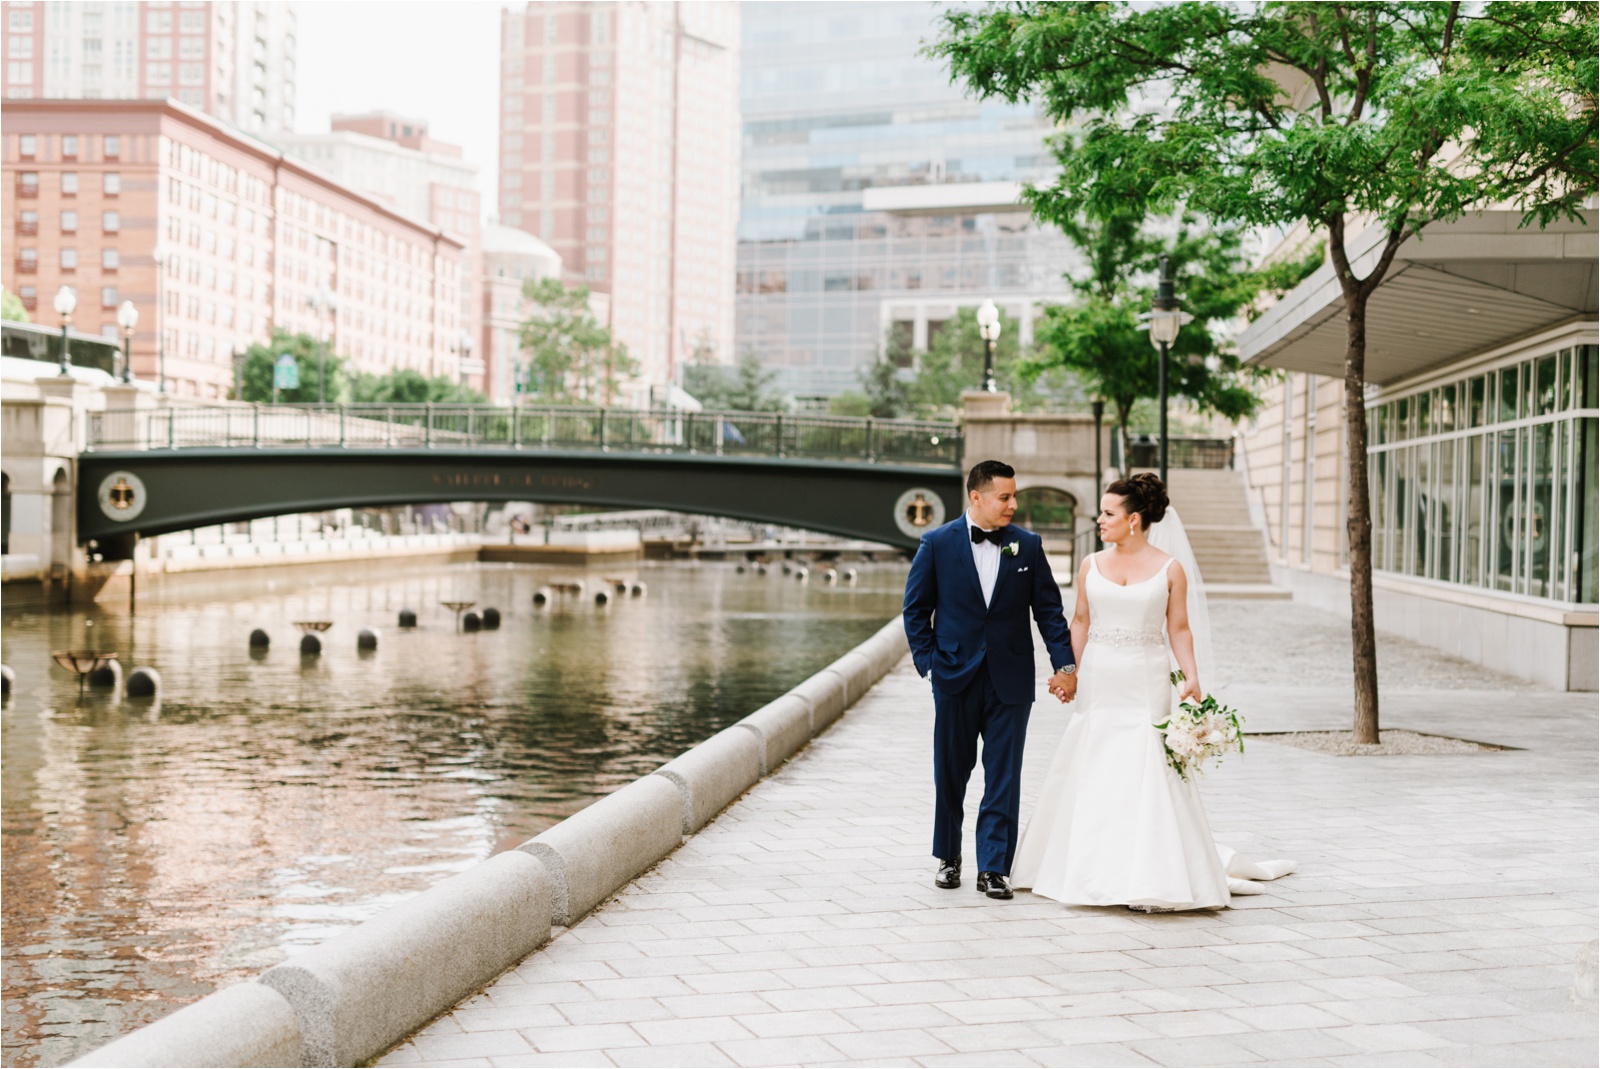 Classic Neutral & Metallic Wedding at Cafe Nuovo in Downtown Proividence, RI by Boston Wedding Photographer Annmarie Swift